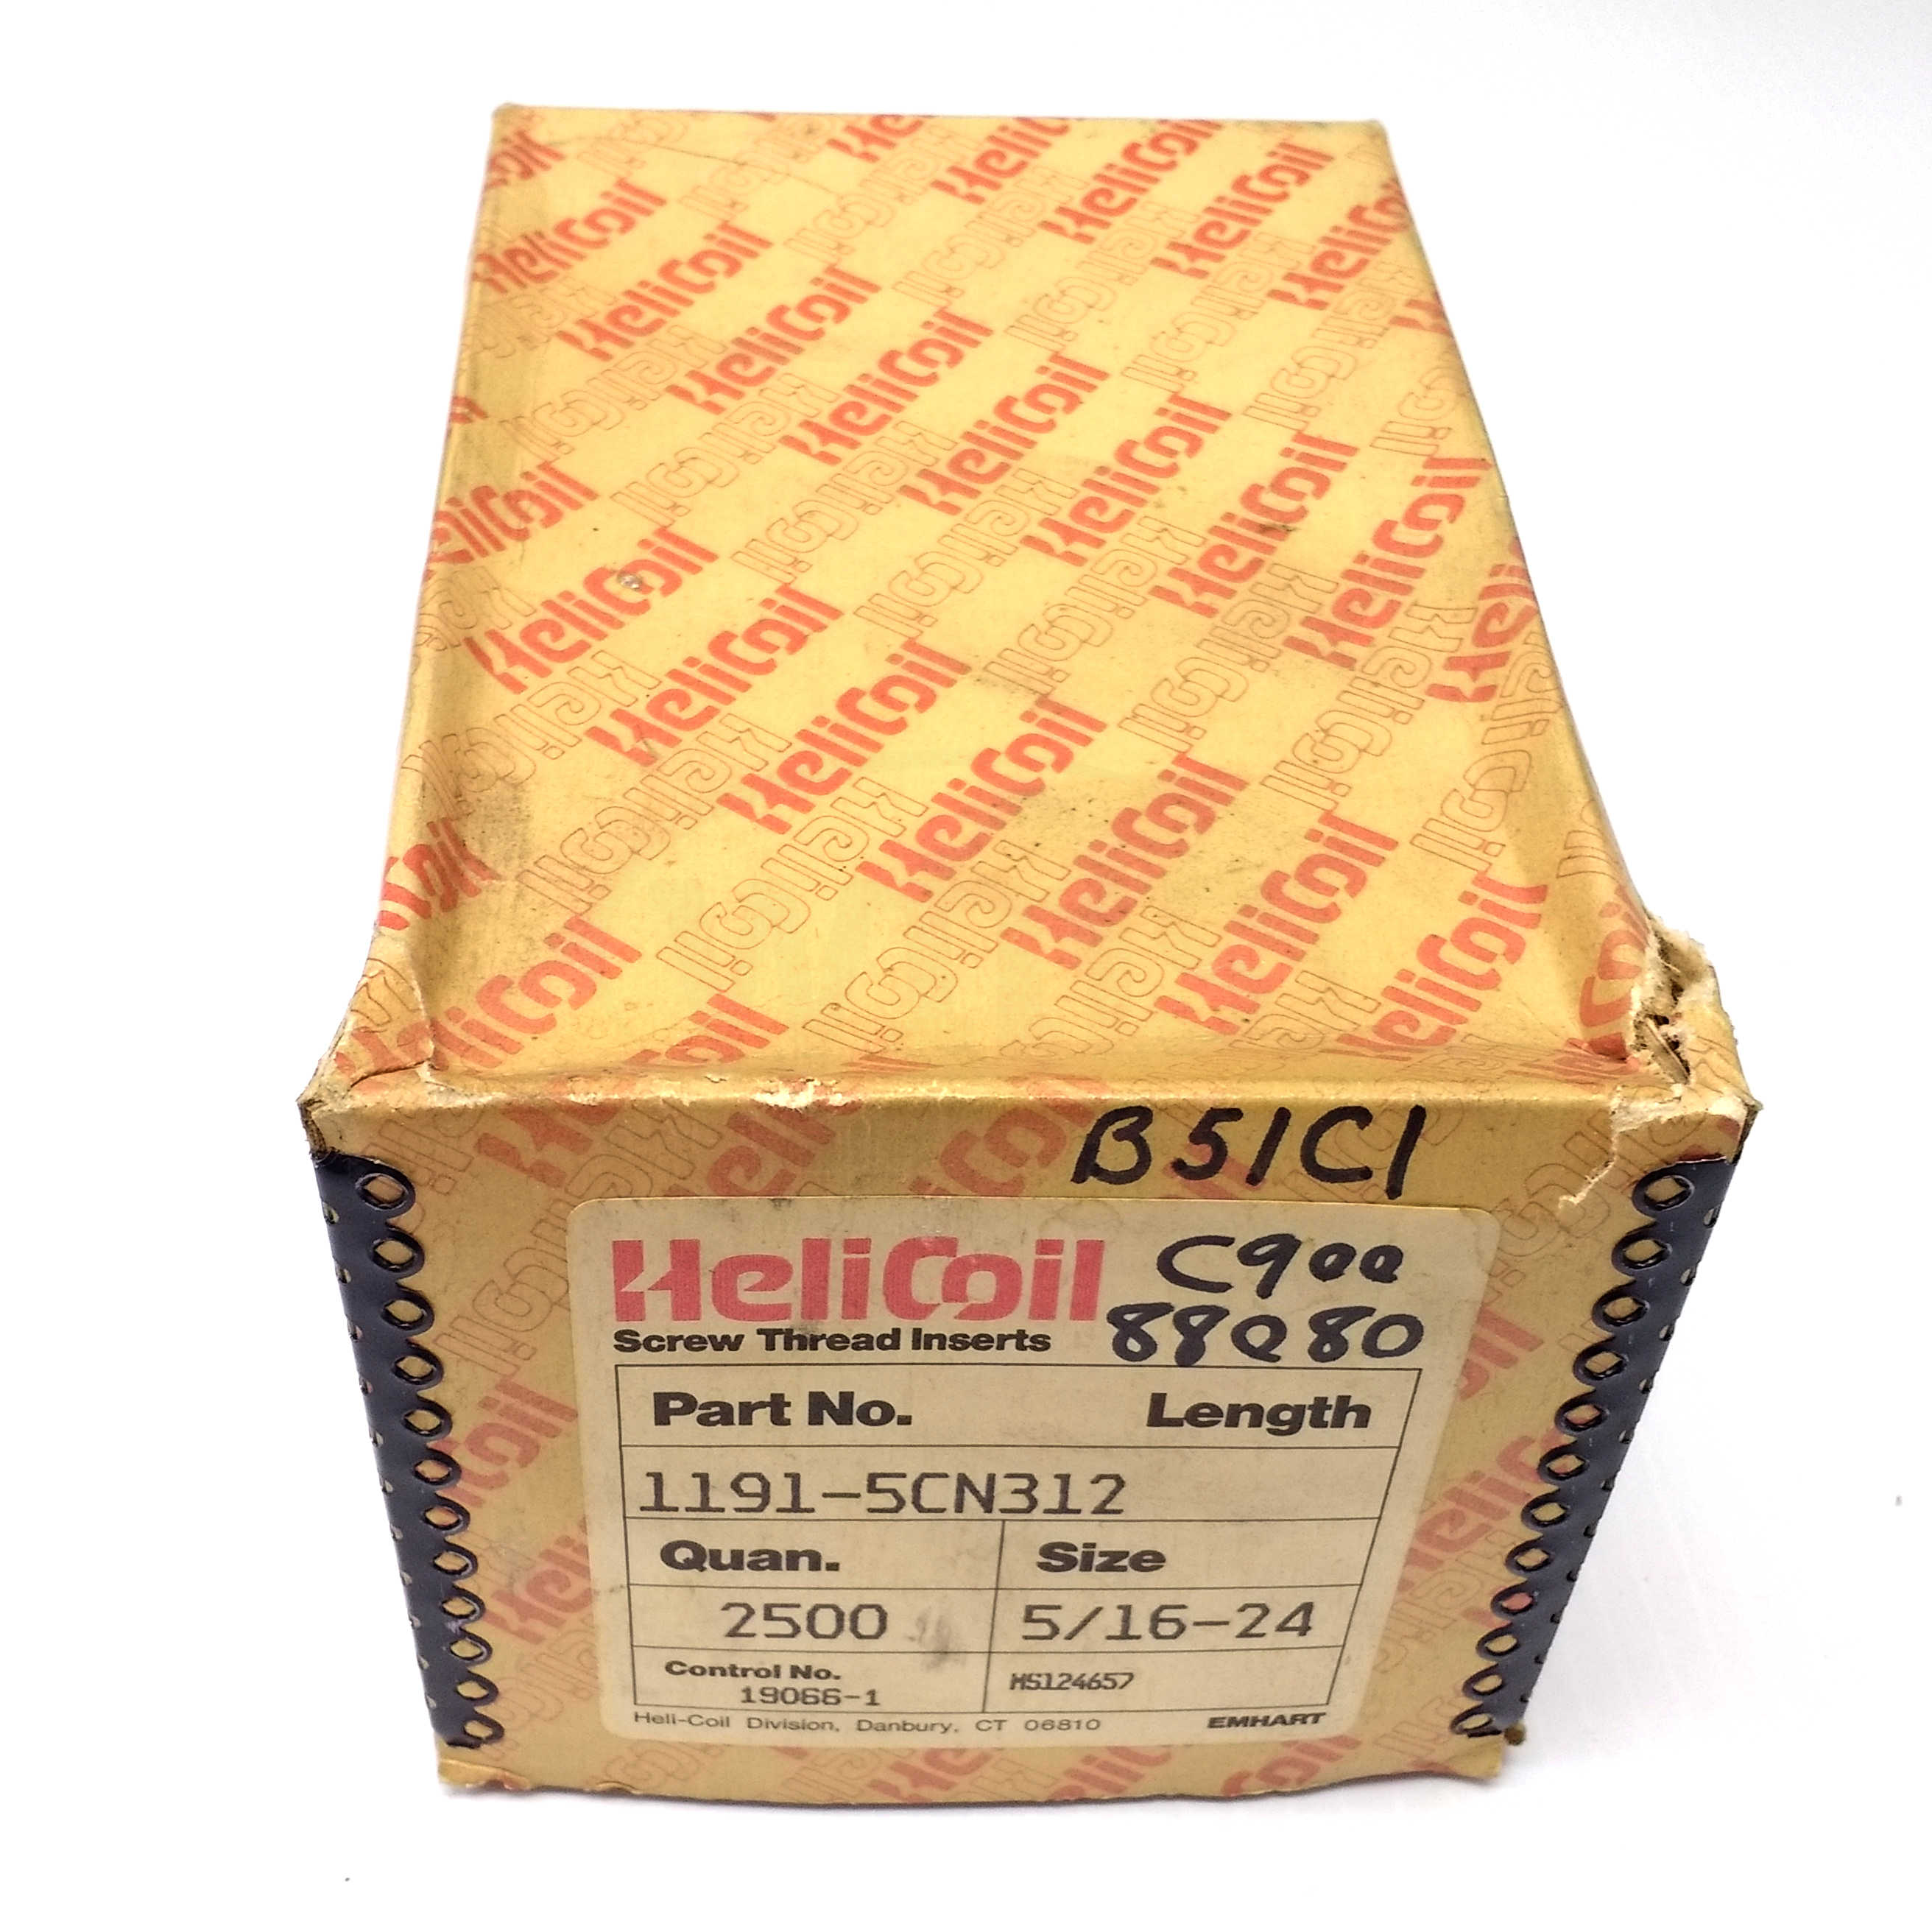 1191-5CN312 HeliCoil 304SS 5/16'-24, 2500 Box 2